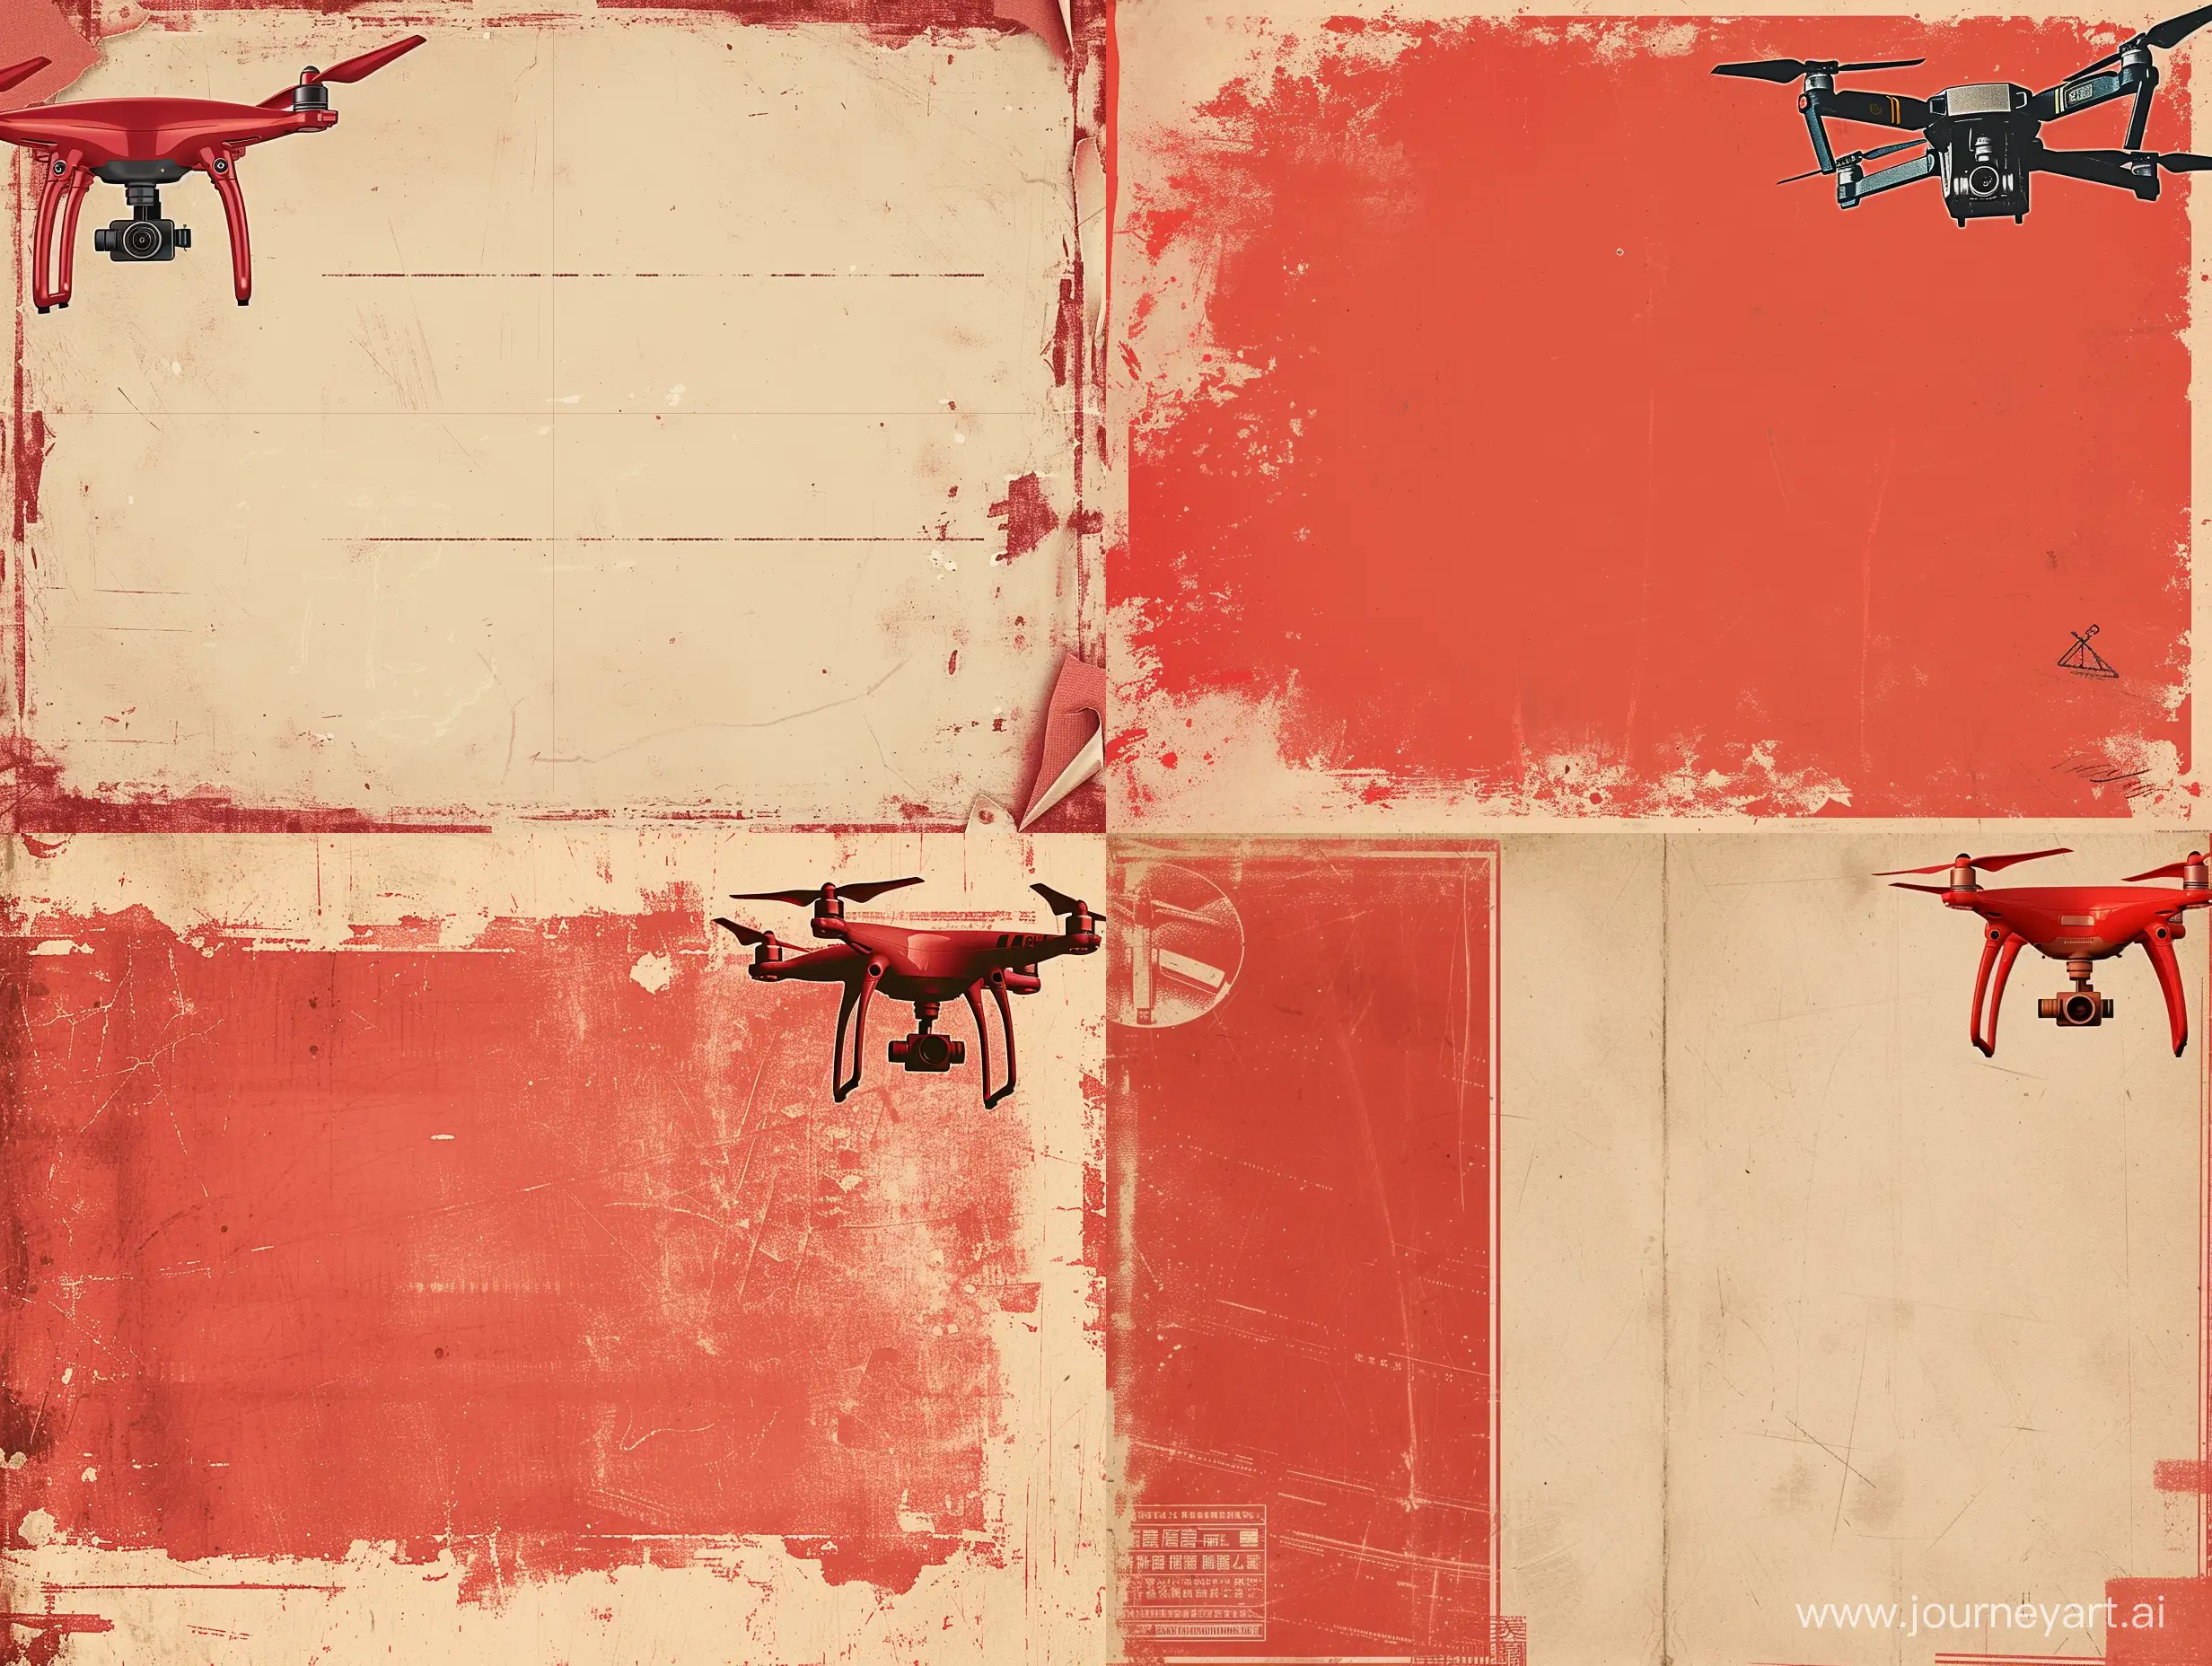 Vintage-Communist-Poster-with-Red-Palette-and-Quadcopter